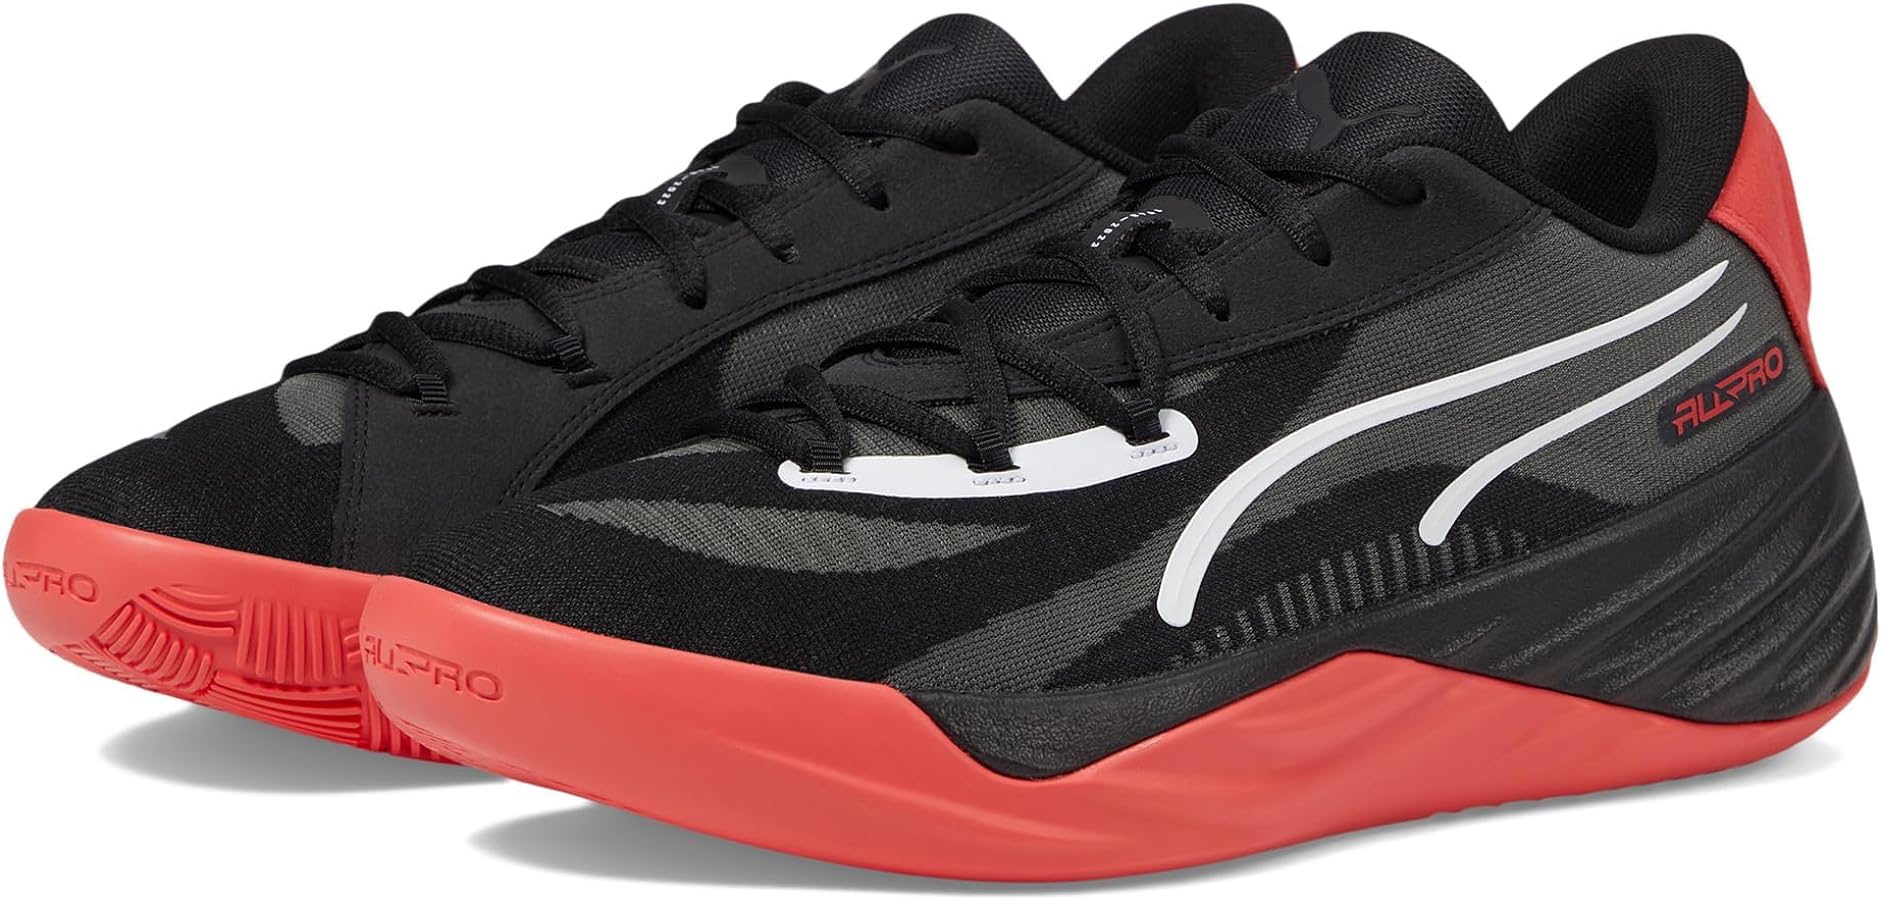 Best volleyball shoes